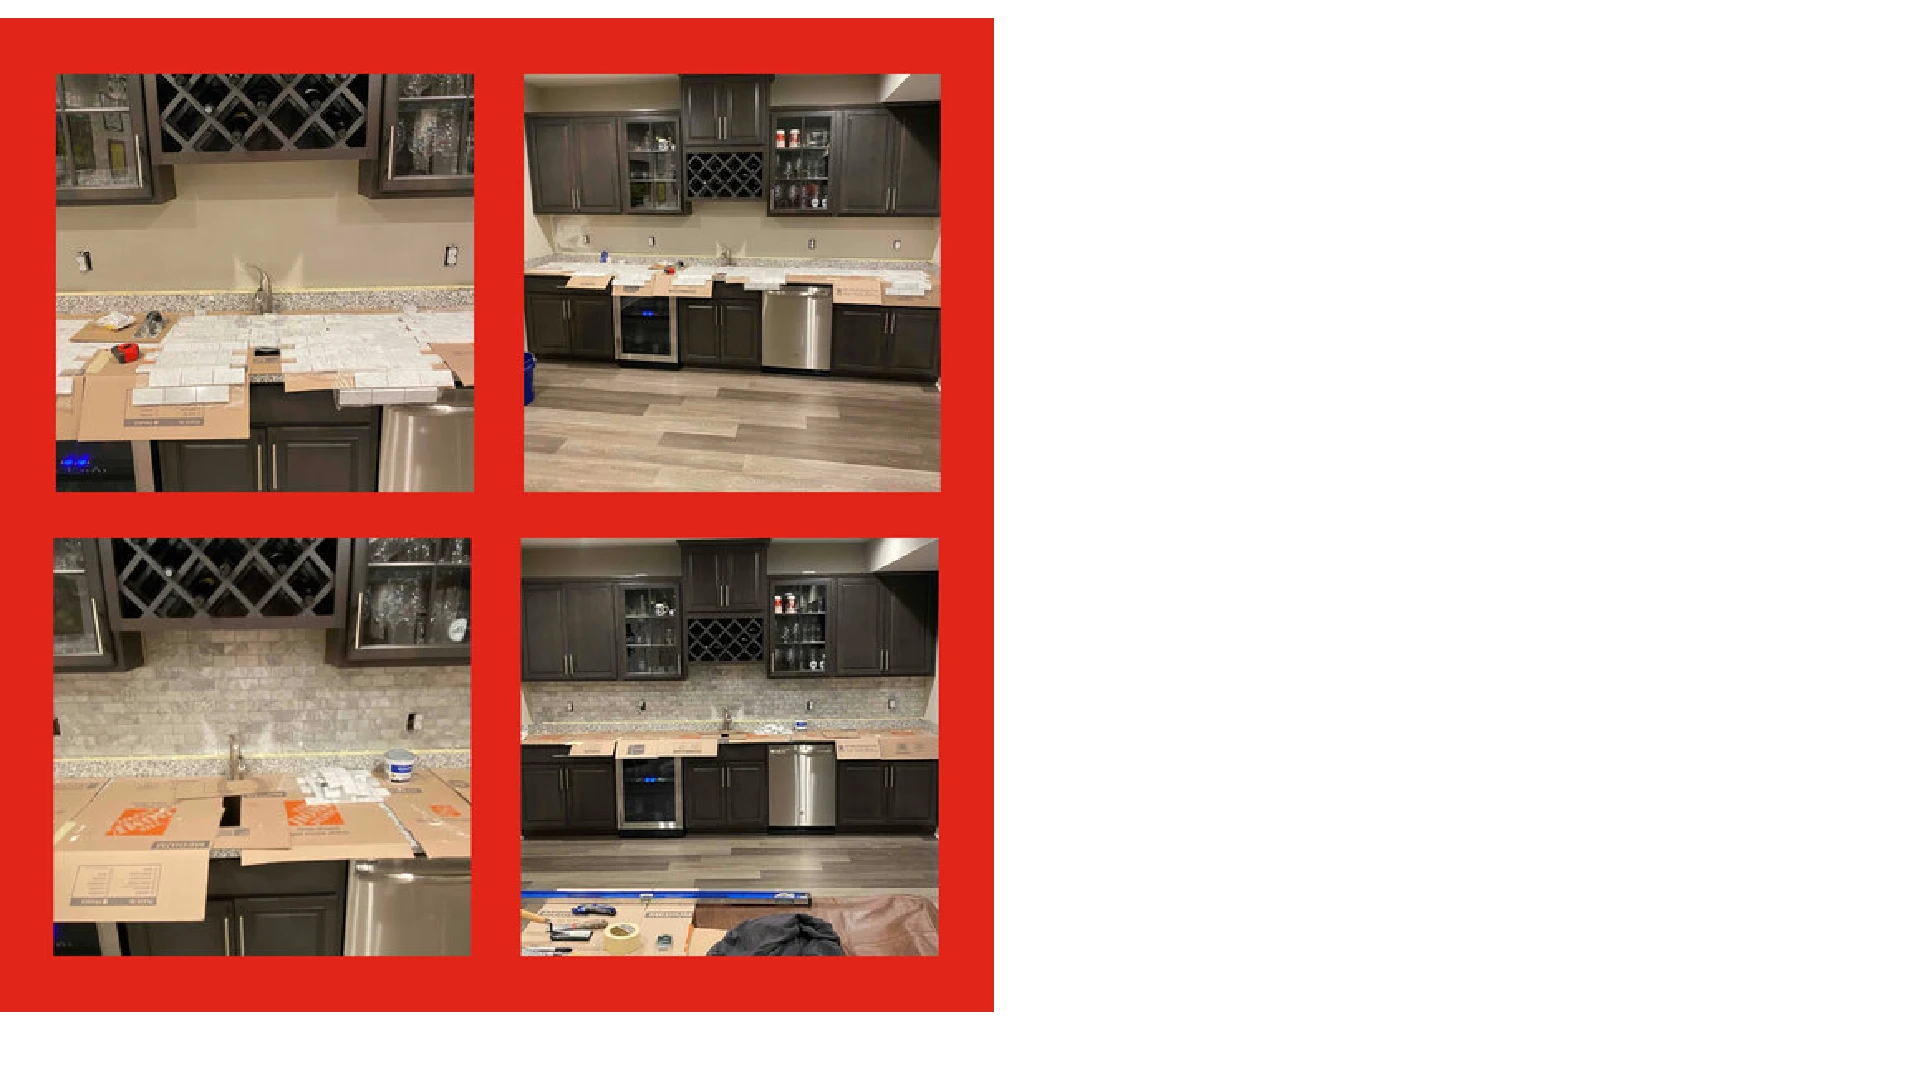 A close-up and wide view of a kitchen backsplash before and after a new tile installation has been completed by Mr. Handyman.